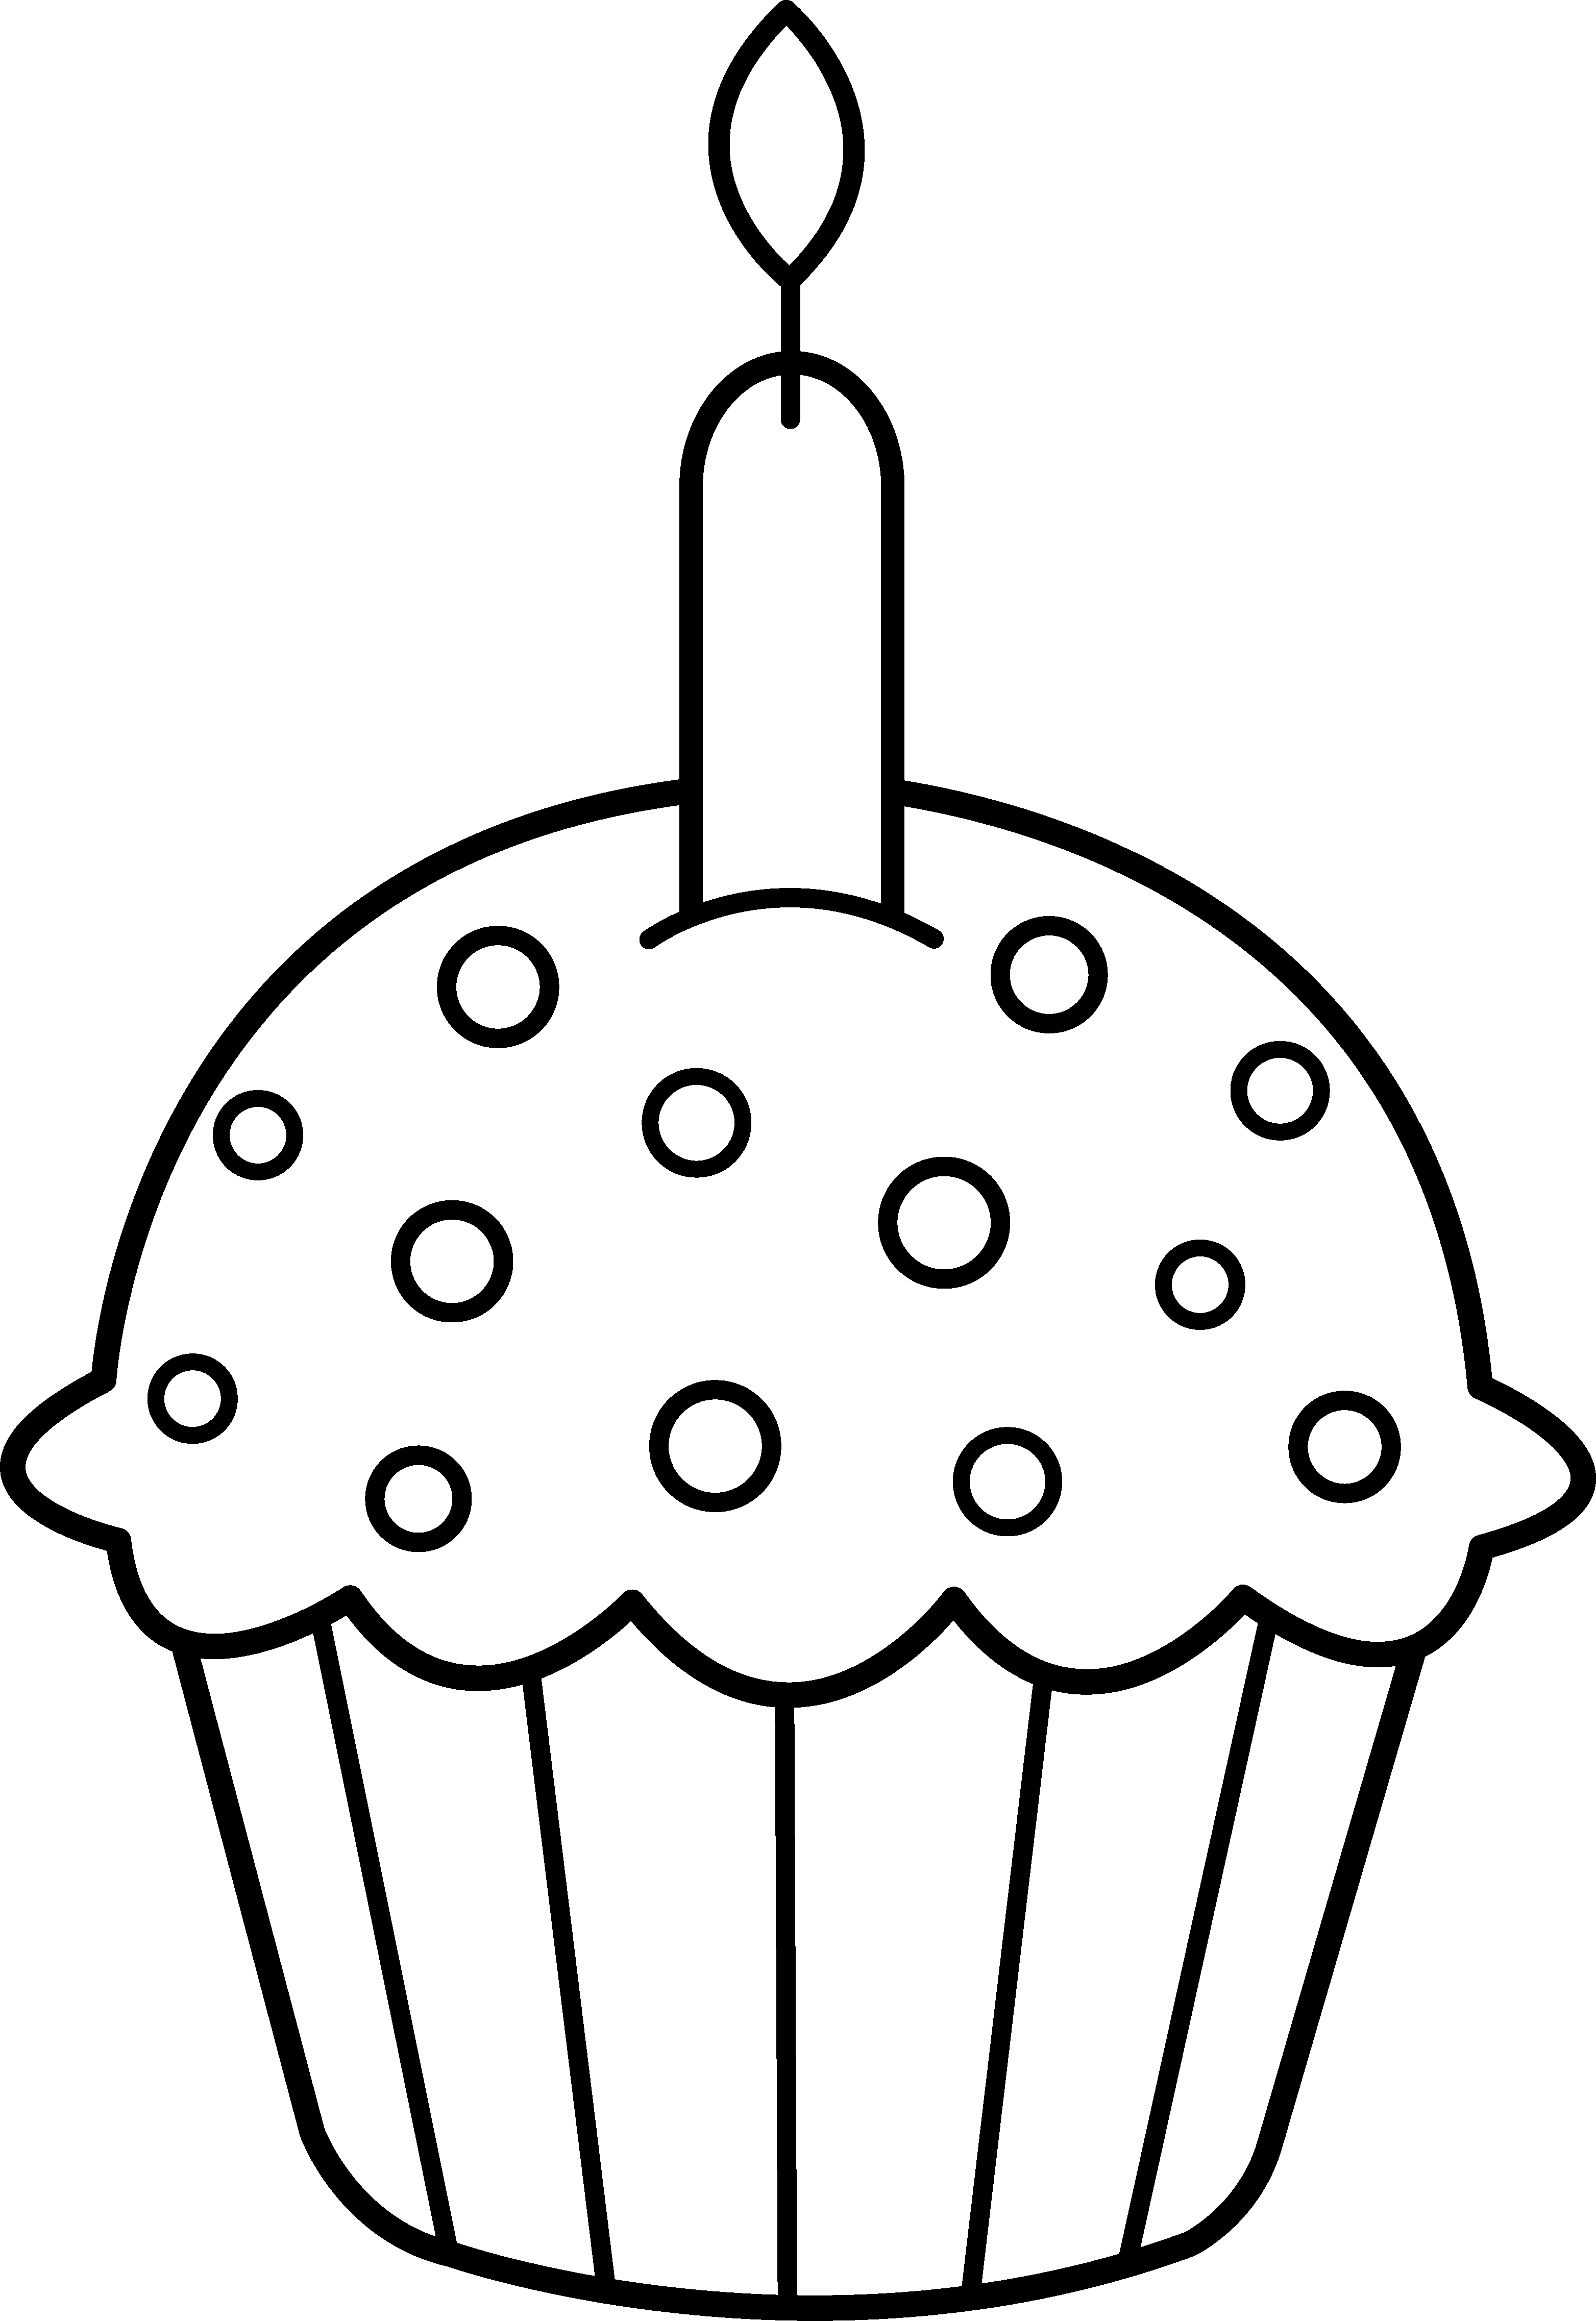 White clipart cupcake.  collection of birthday